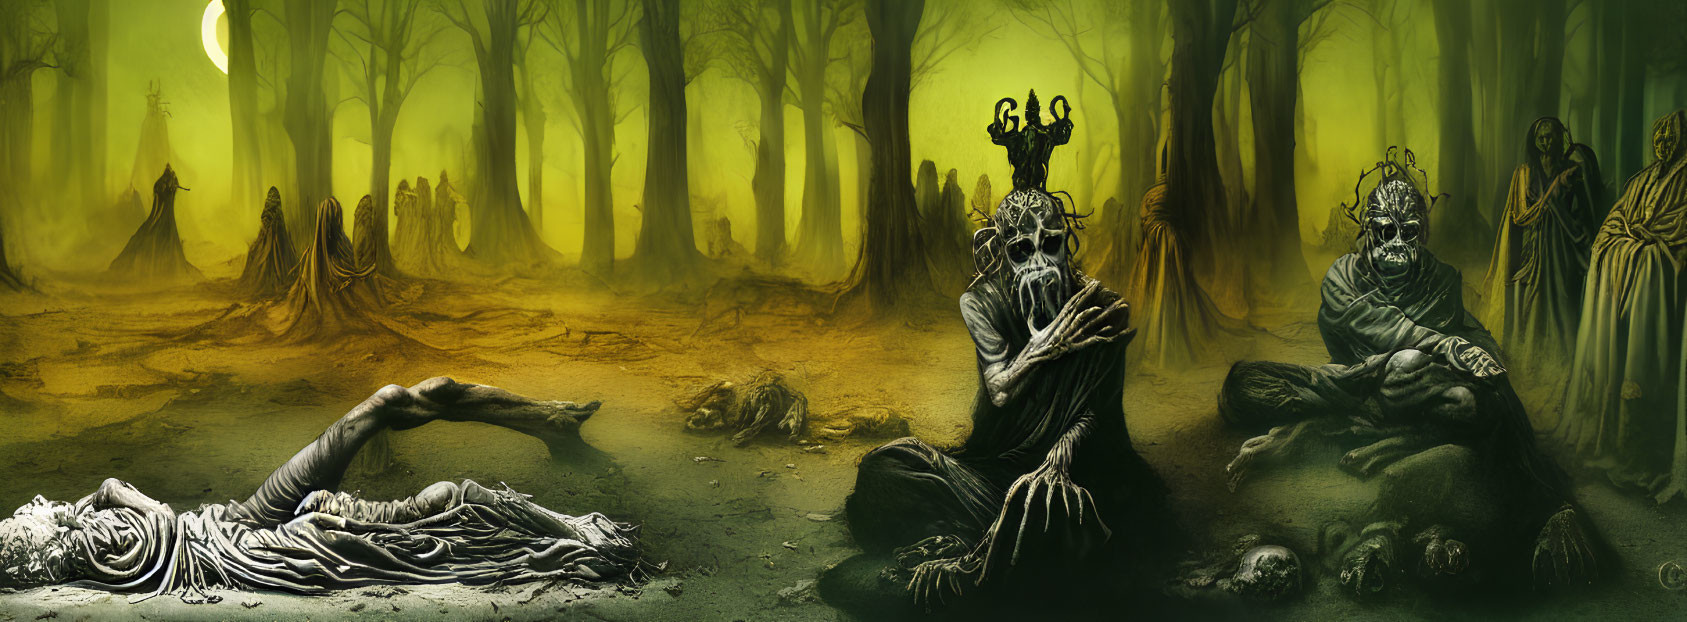 Eerie forest scene with skeletal figures and ghoulish entities